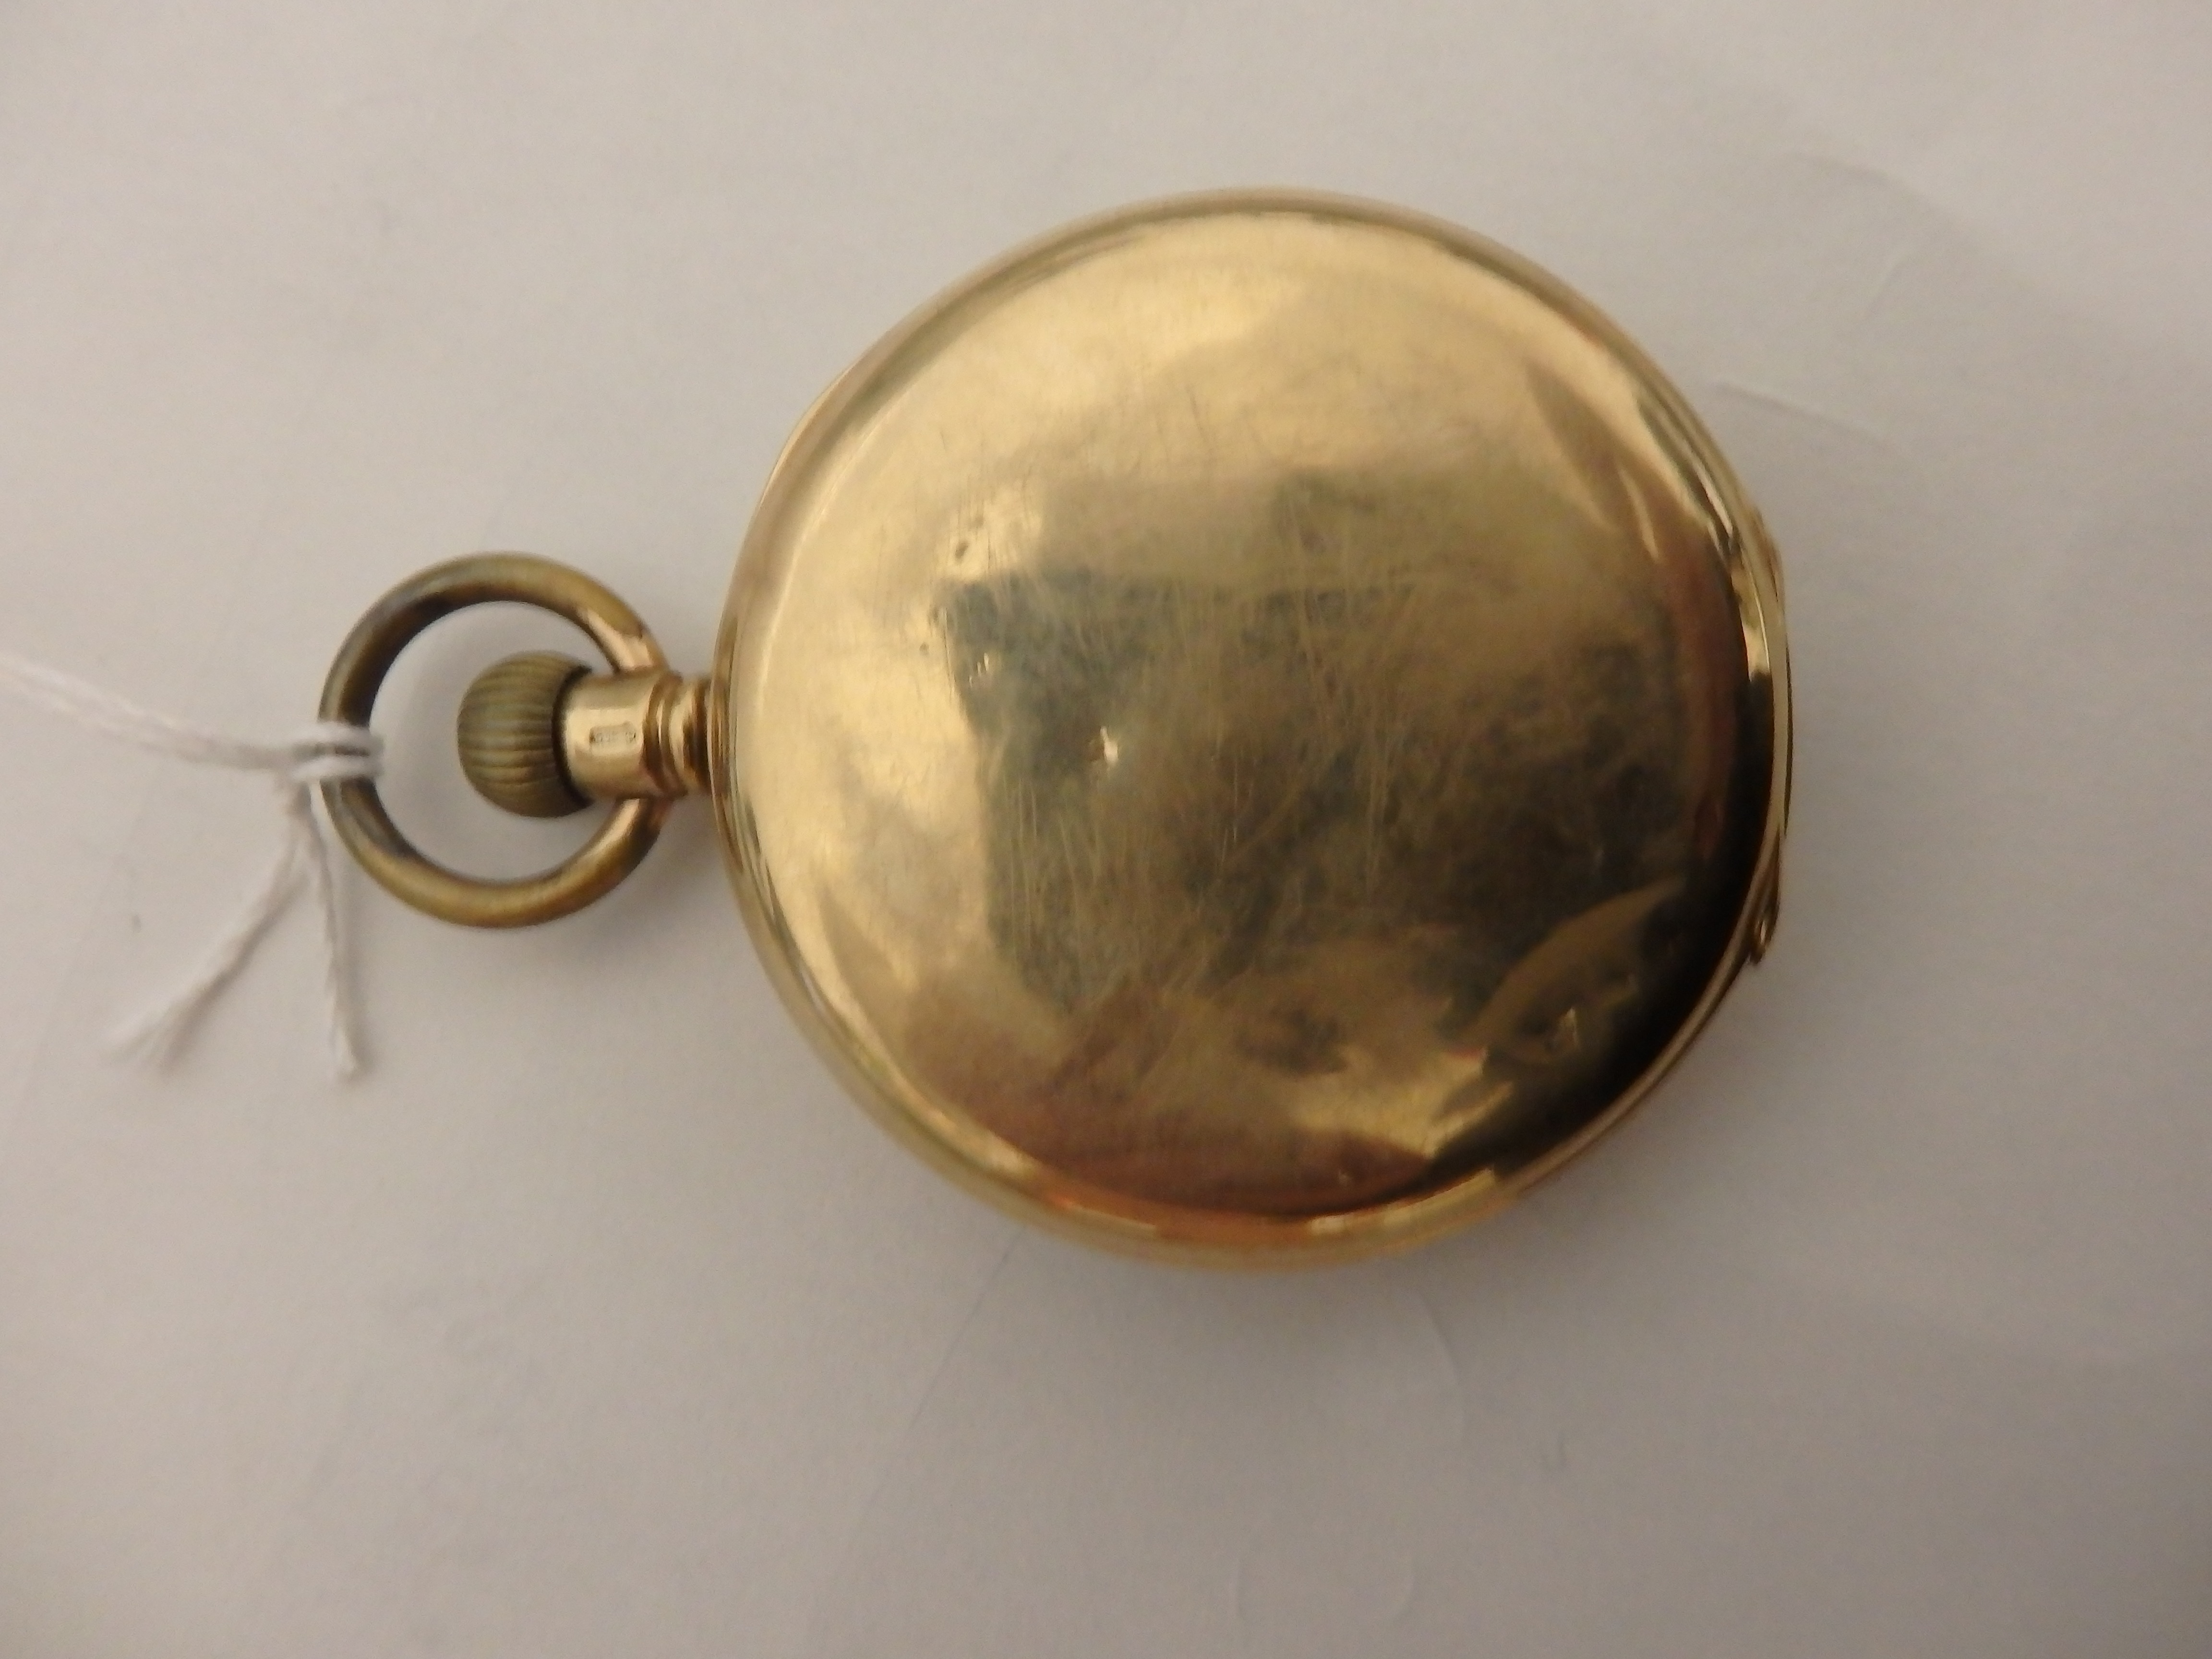 9ct Gold pocket watch made by Waltham - Image 5 of 7